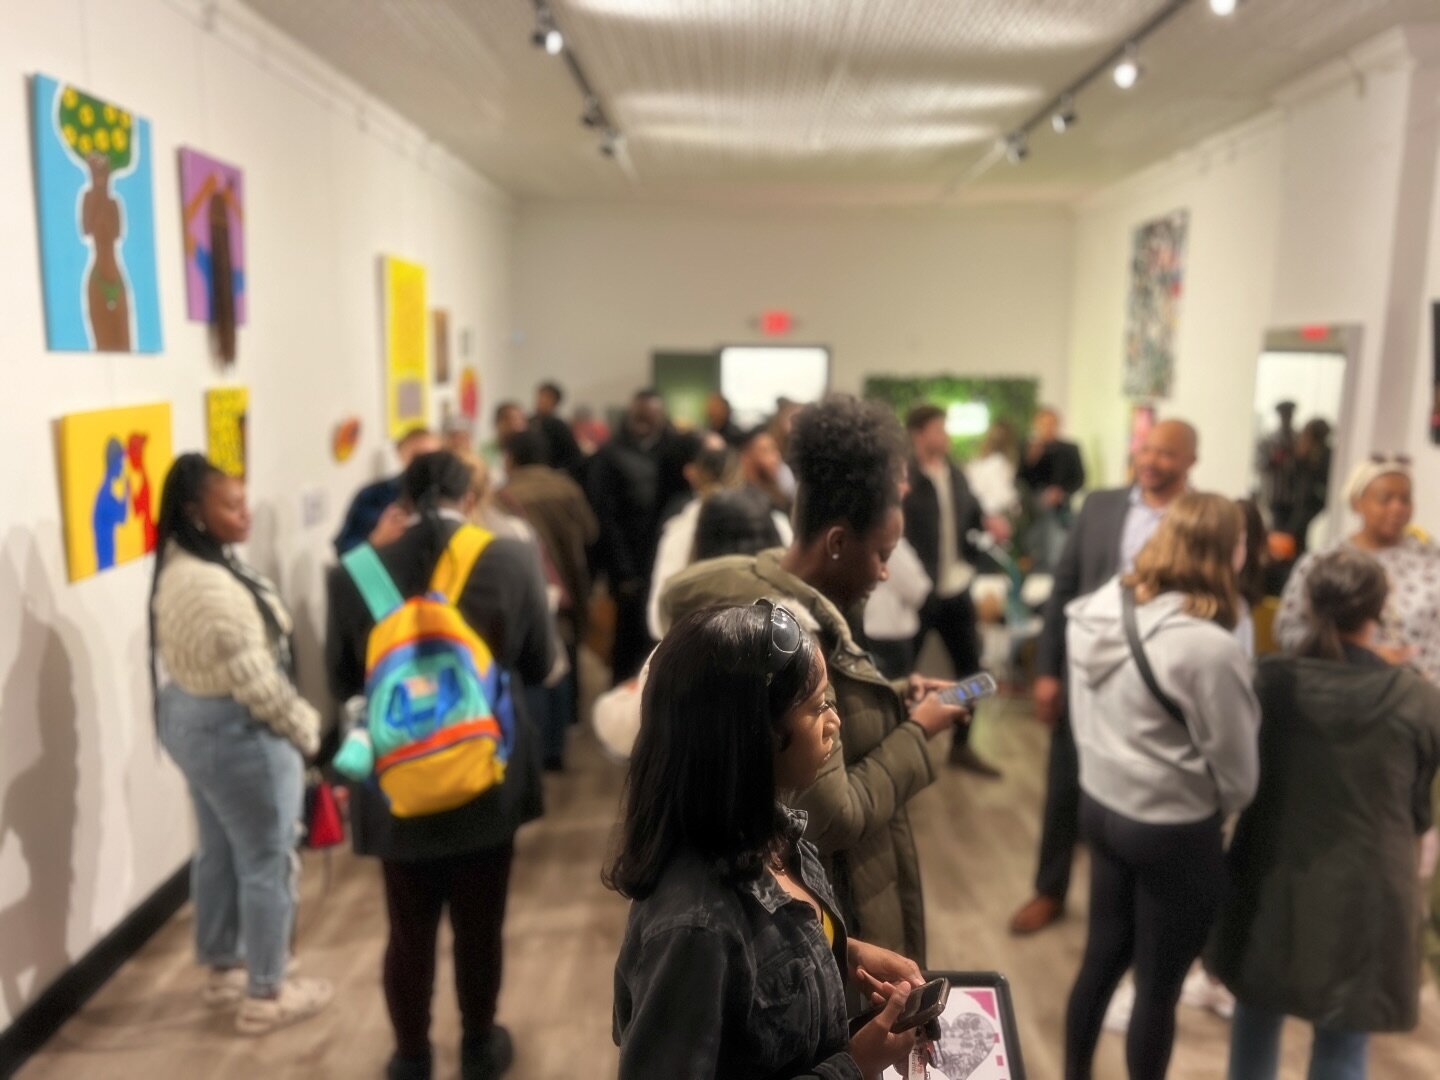 Allow us to reintroduce ourselves: 1000 Words is a non-profit, Black-owned art space located in the heart of Indianapolis, deeply committed to uplifting emerging Black and Brown visual artists. Our mission is clear: offer a platform for our local art